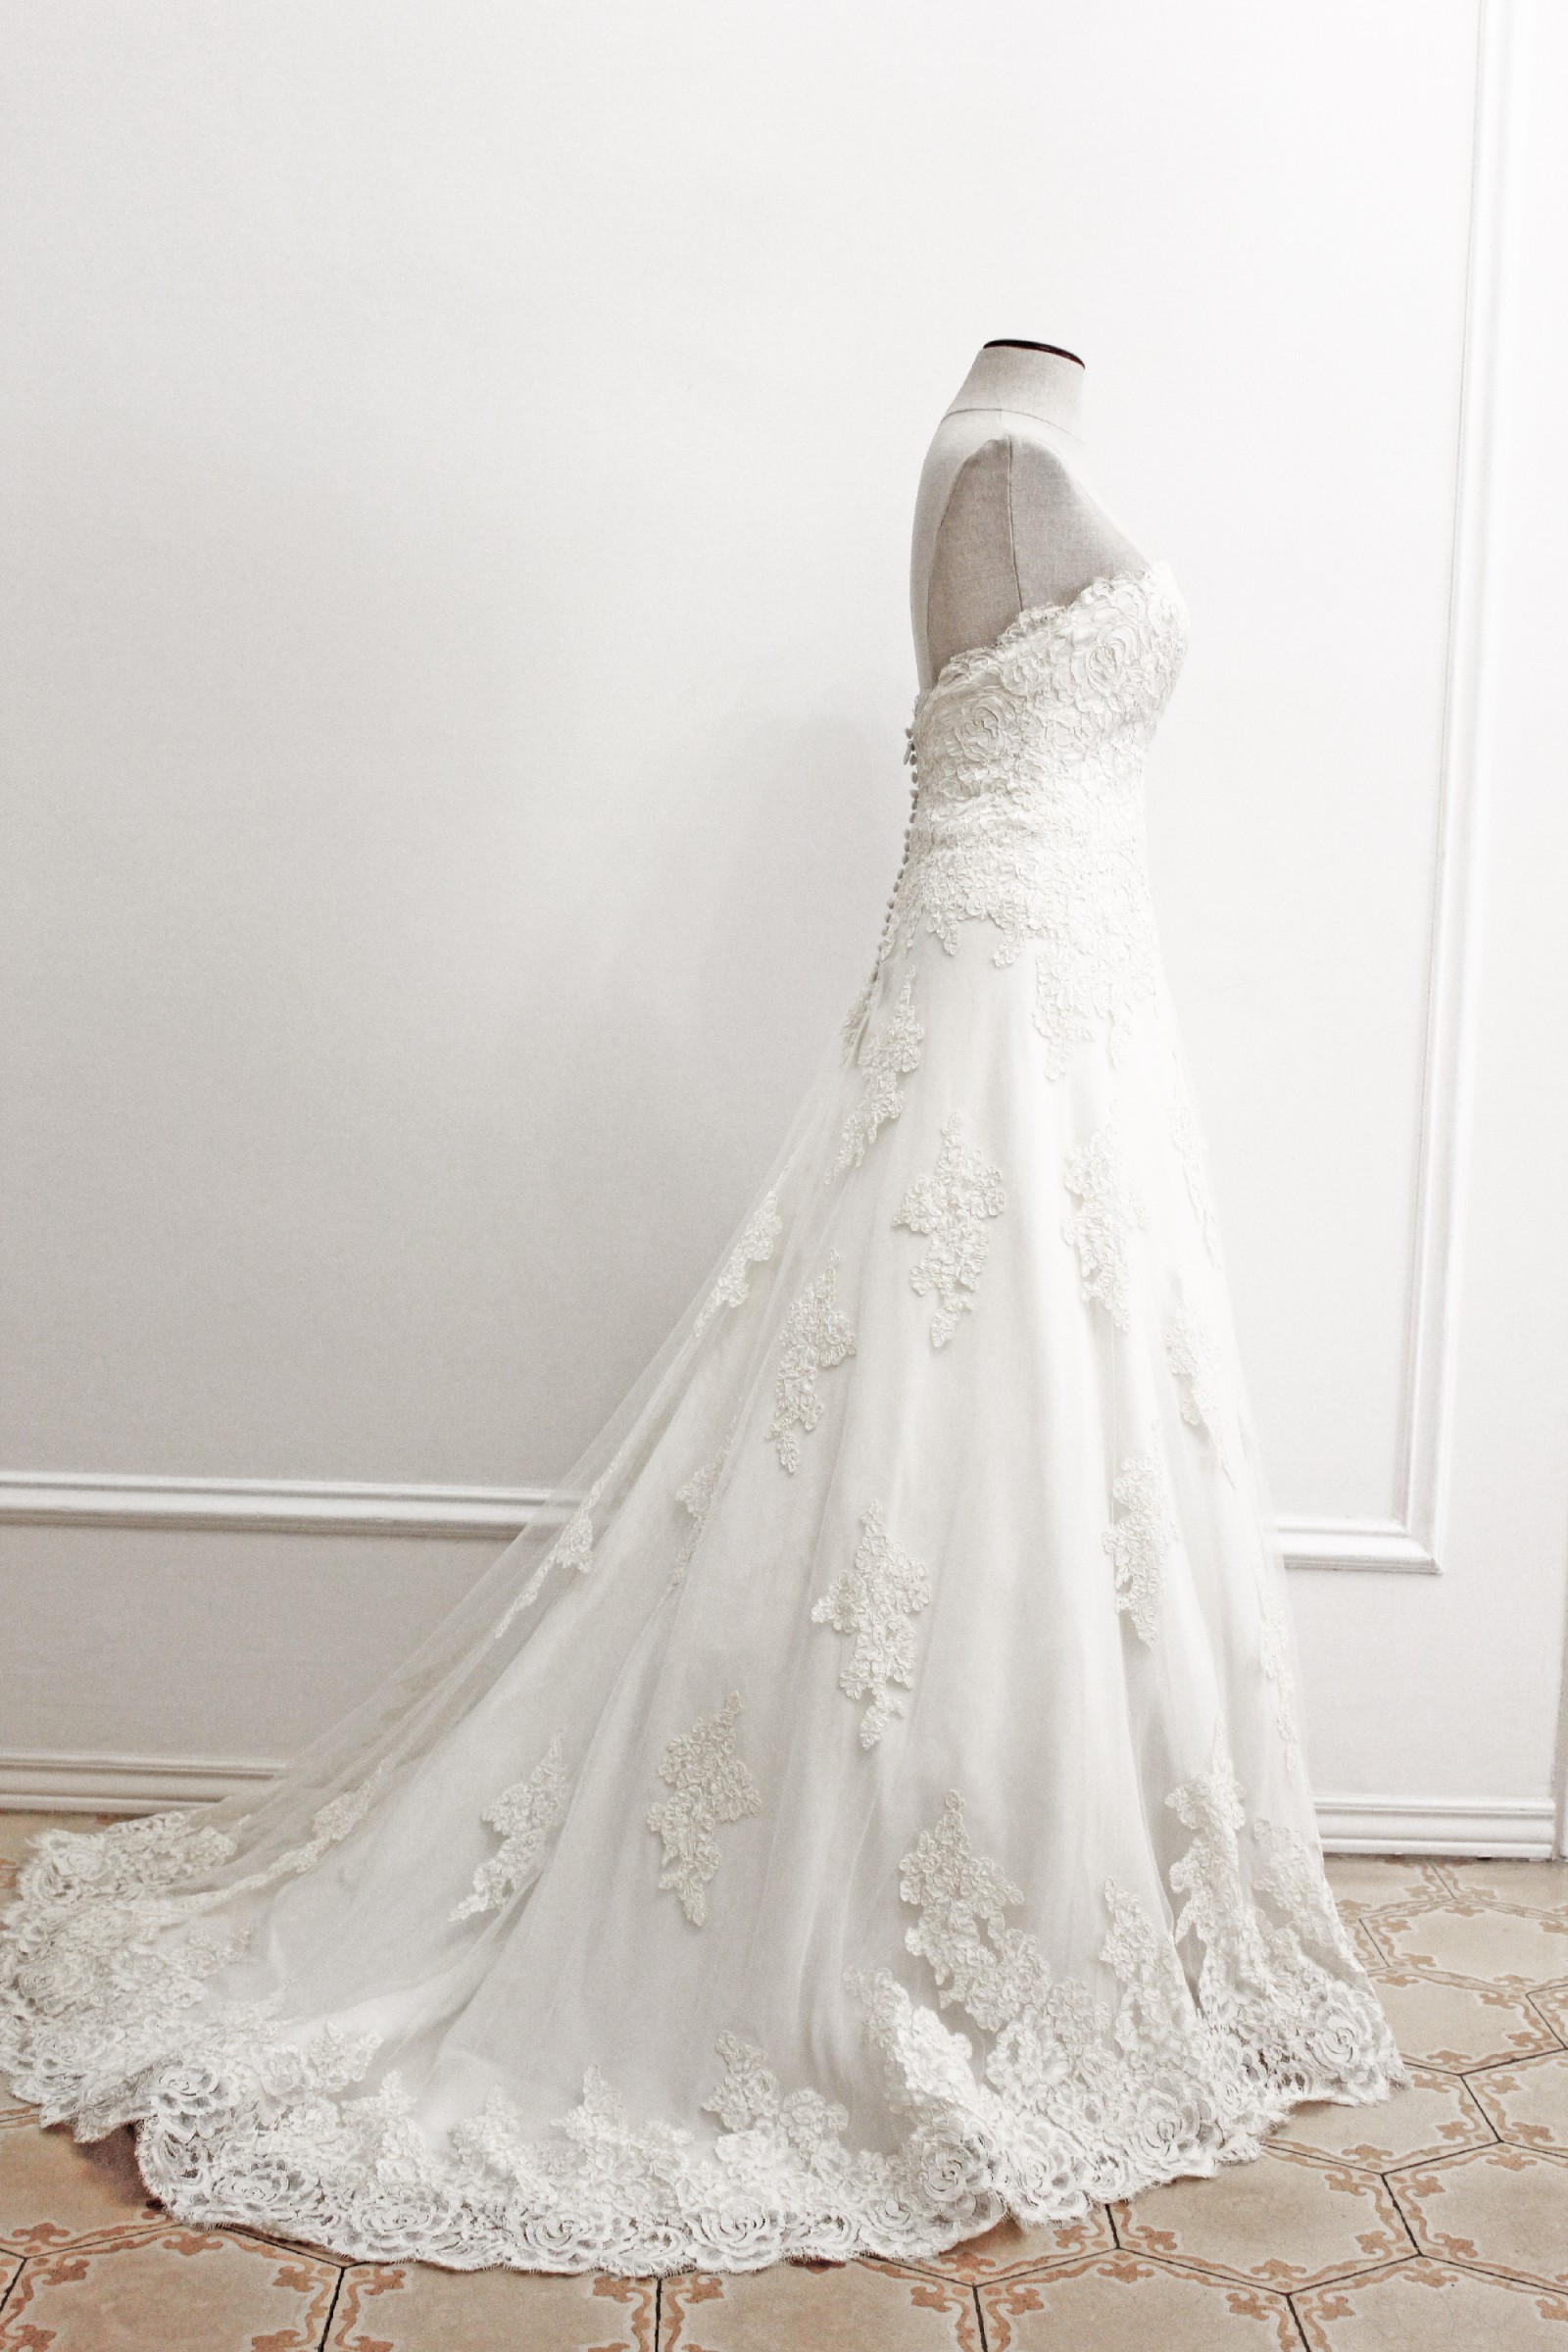 Anne Barge Betrothed gown New Wedding Dress Save 58% - Stillwhite